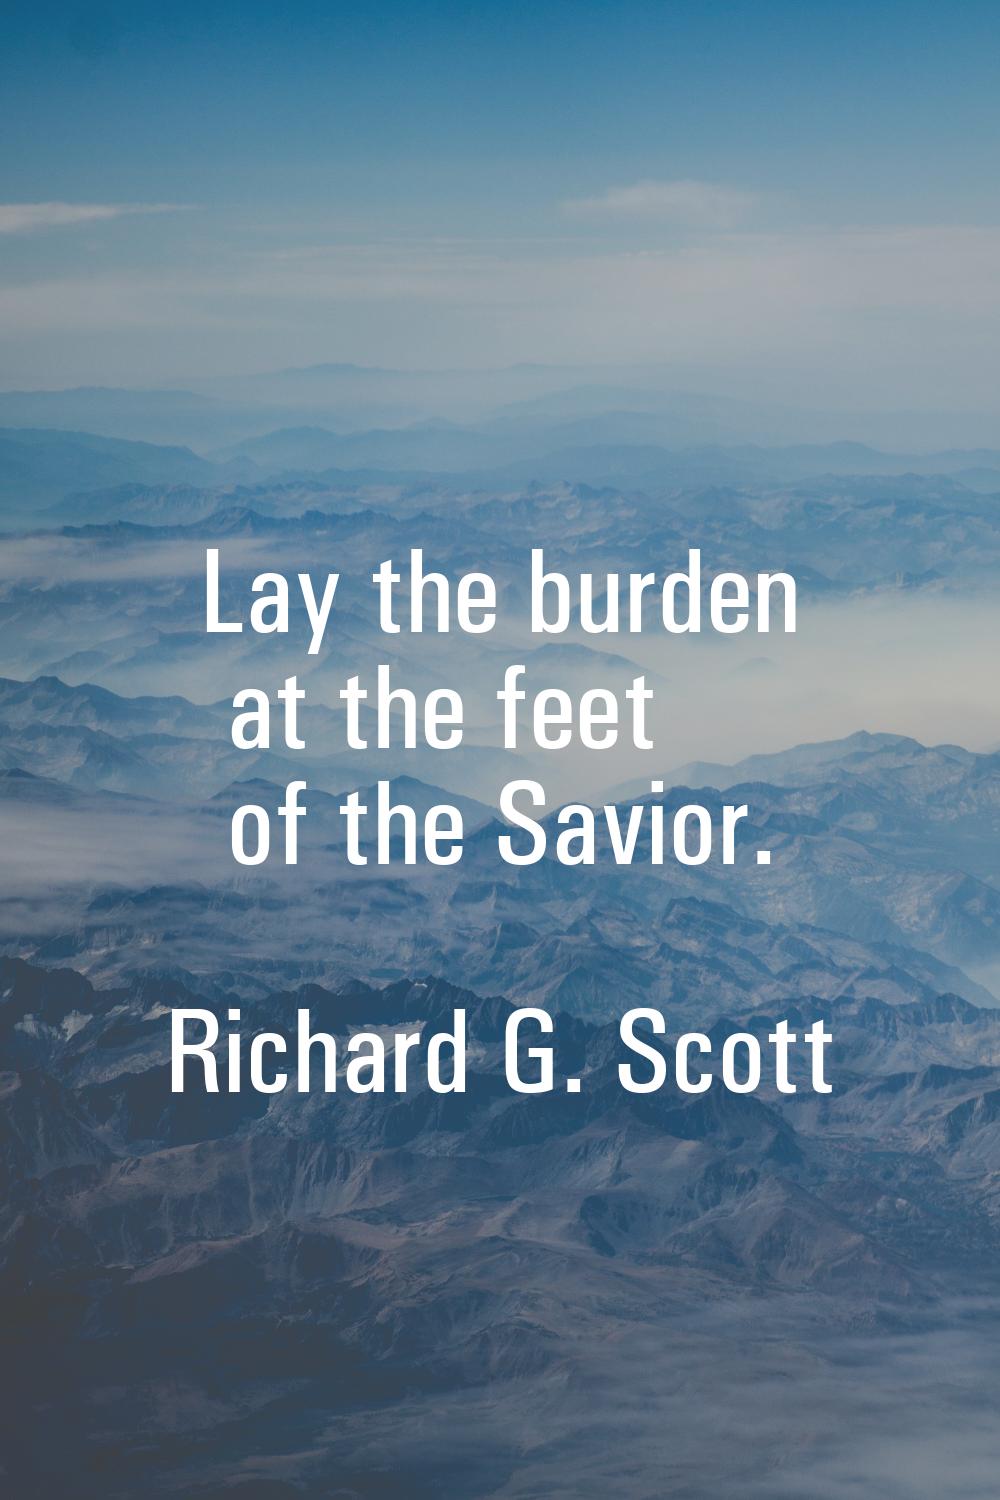 Lay the burden at the feet of the Savior.